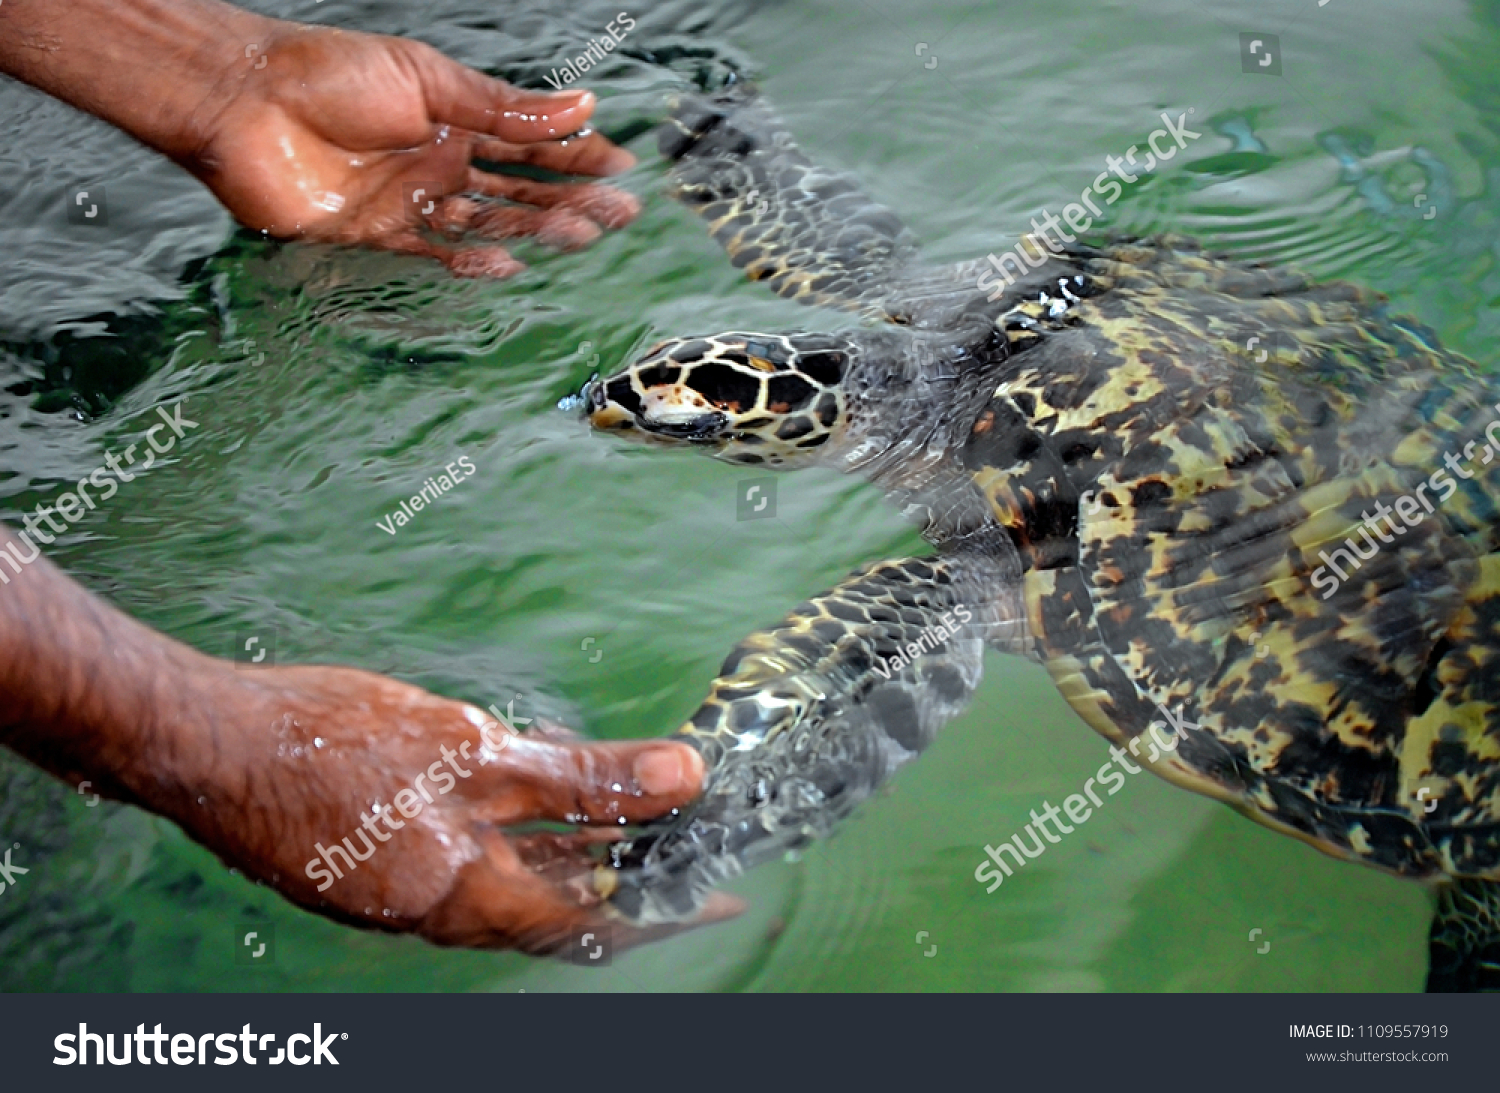  The rescued tortoise holds its flippers with human hands  . Sea Turtles Conservation Research Project in Bentota, Sri Lanka. saving animals, trusting people
 #1109557919